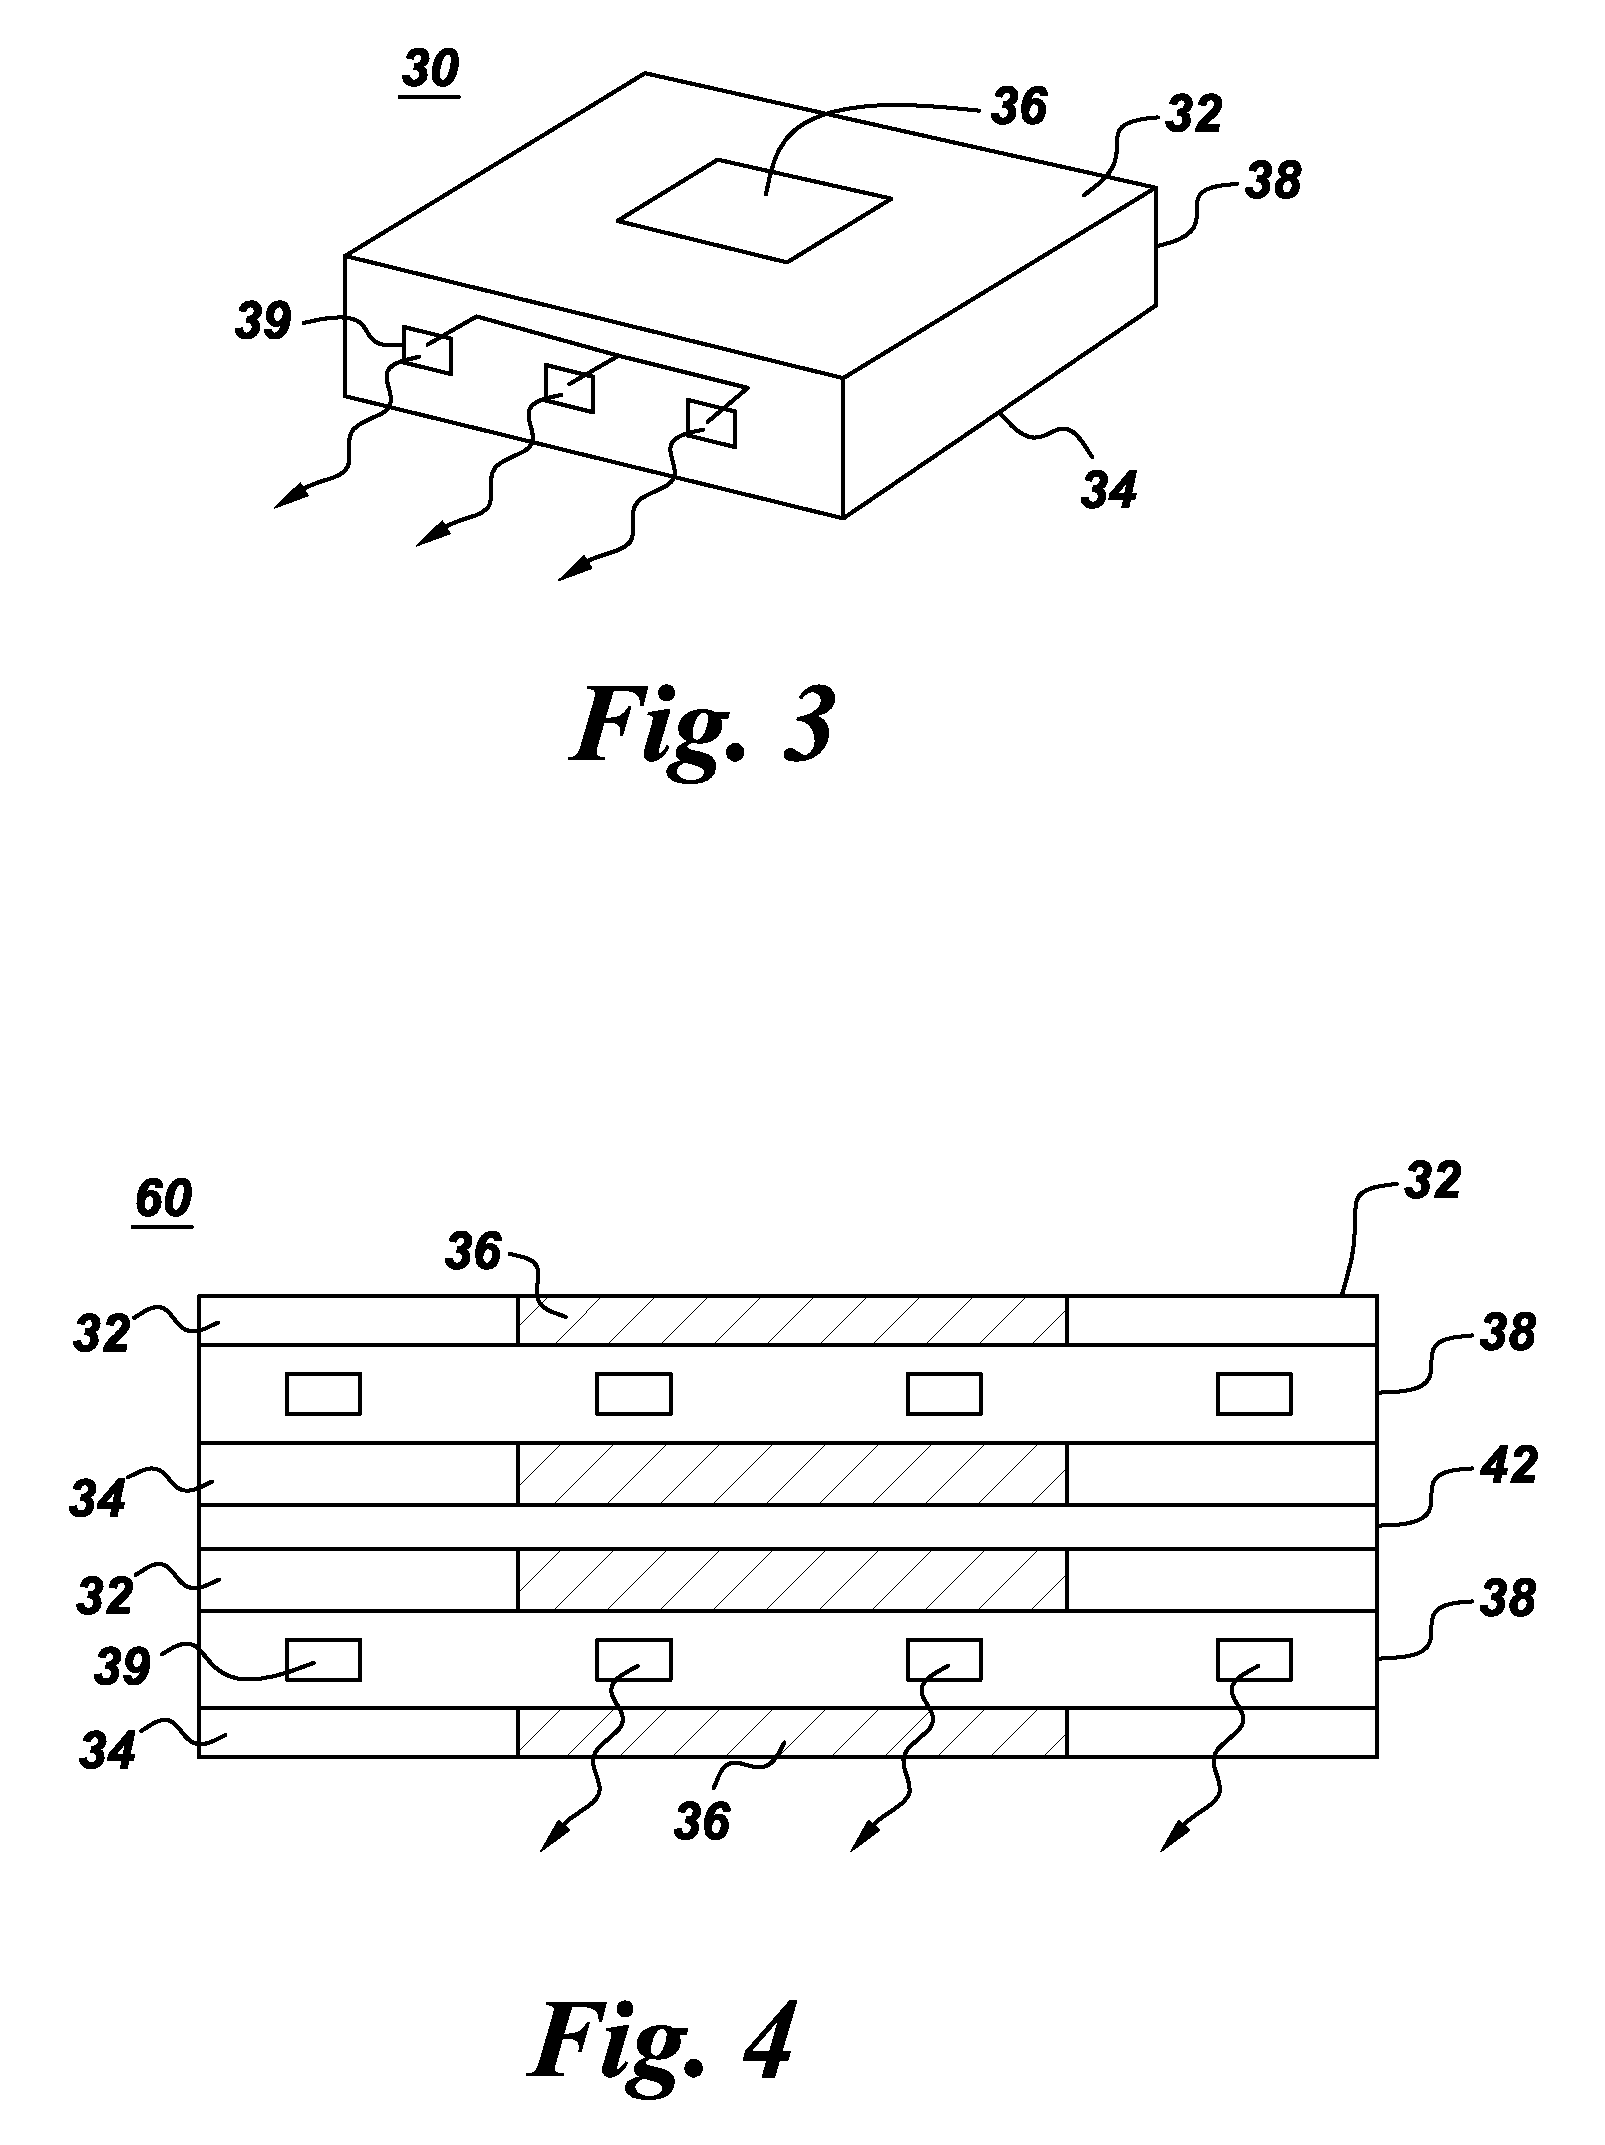 Heat sinks with distributed and integrated jet cooling